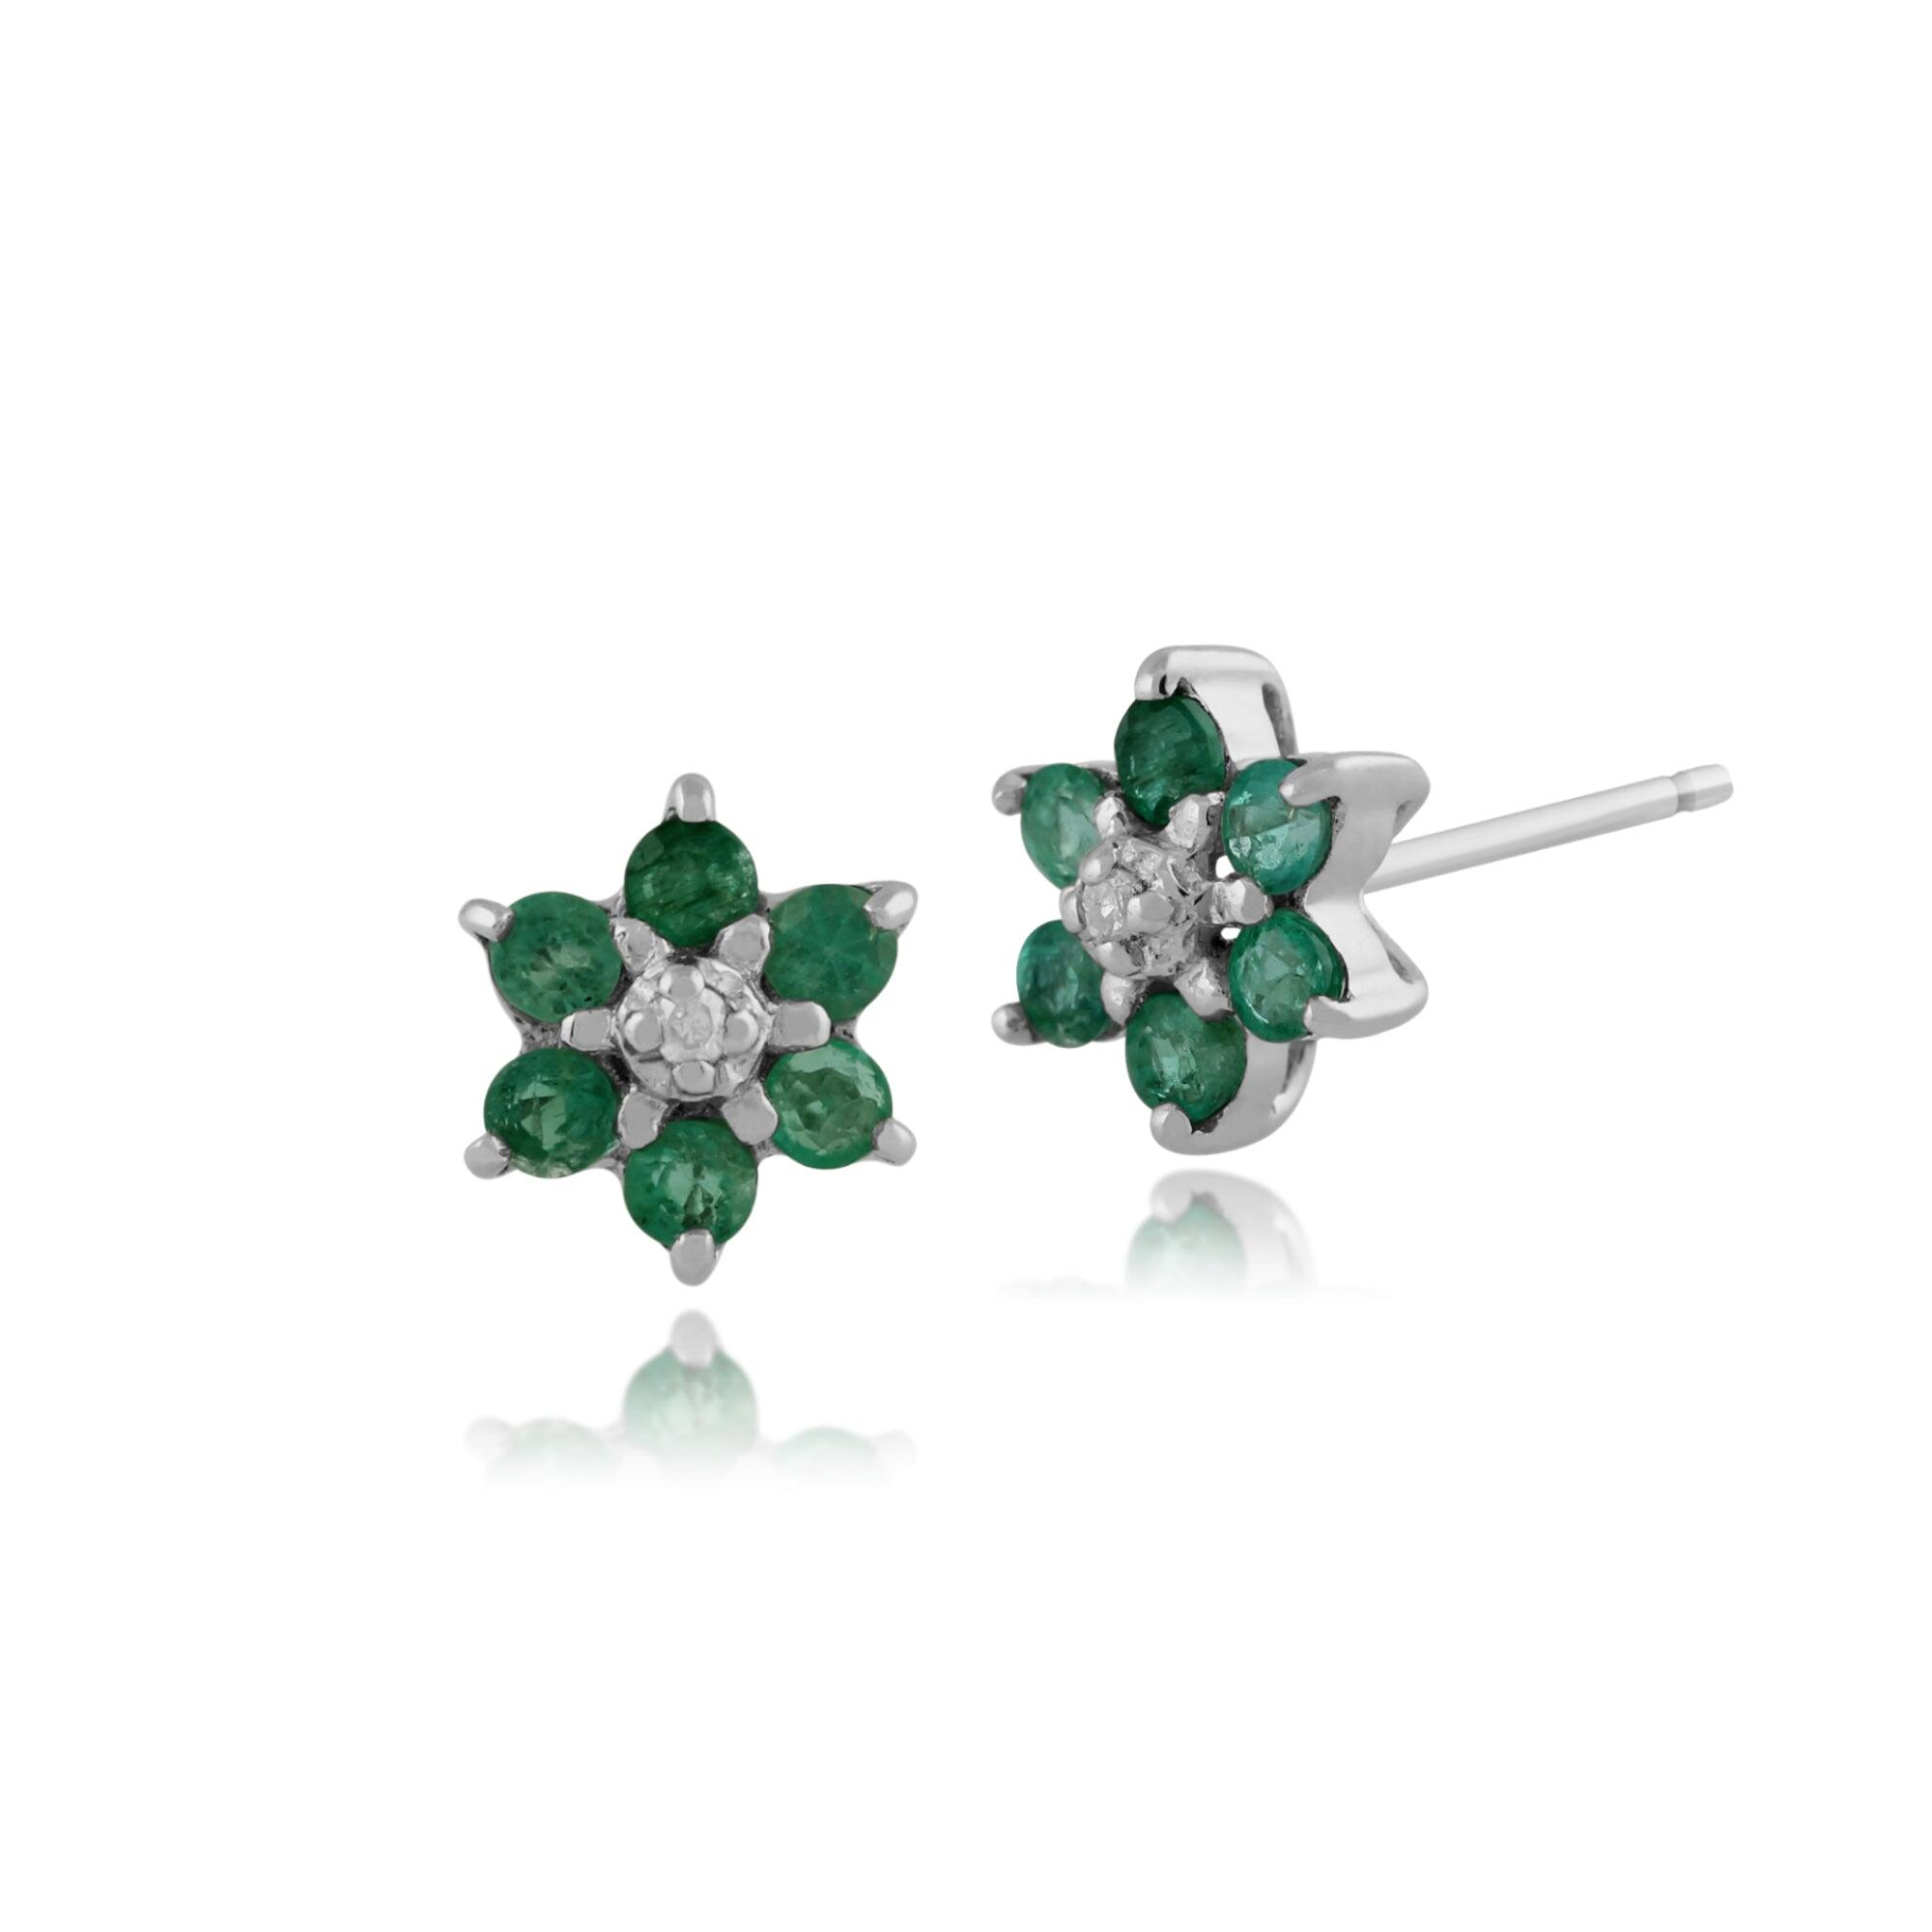 Classic Emerald & Diamond Floral Stud Earrings in 9ct White Gold